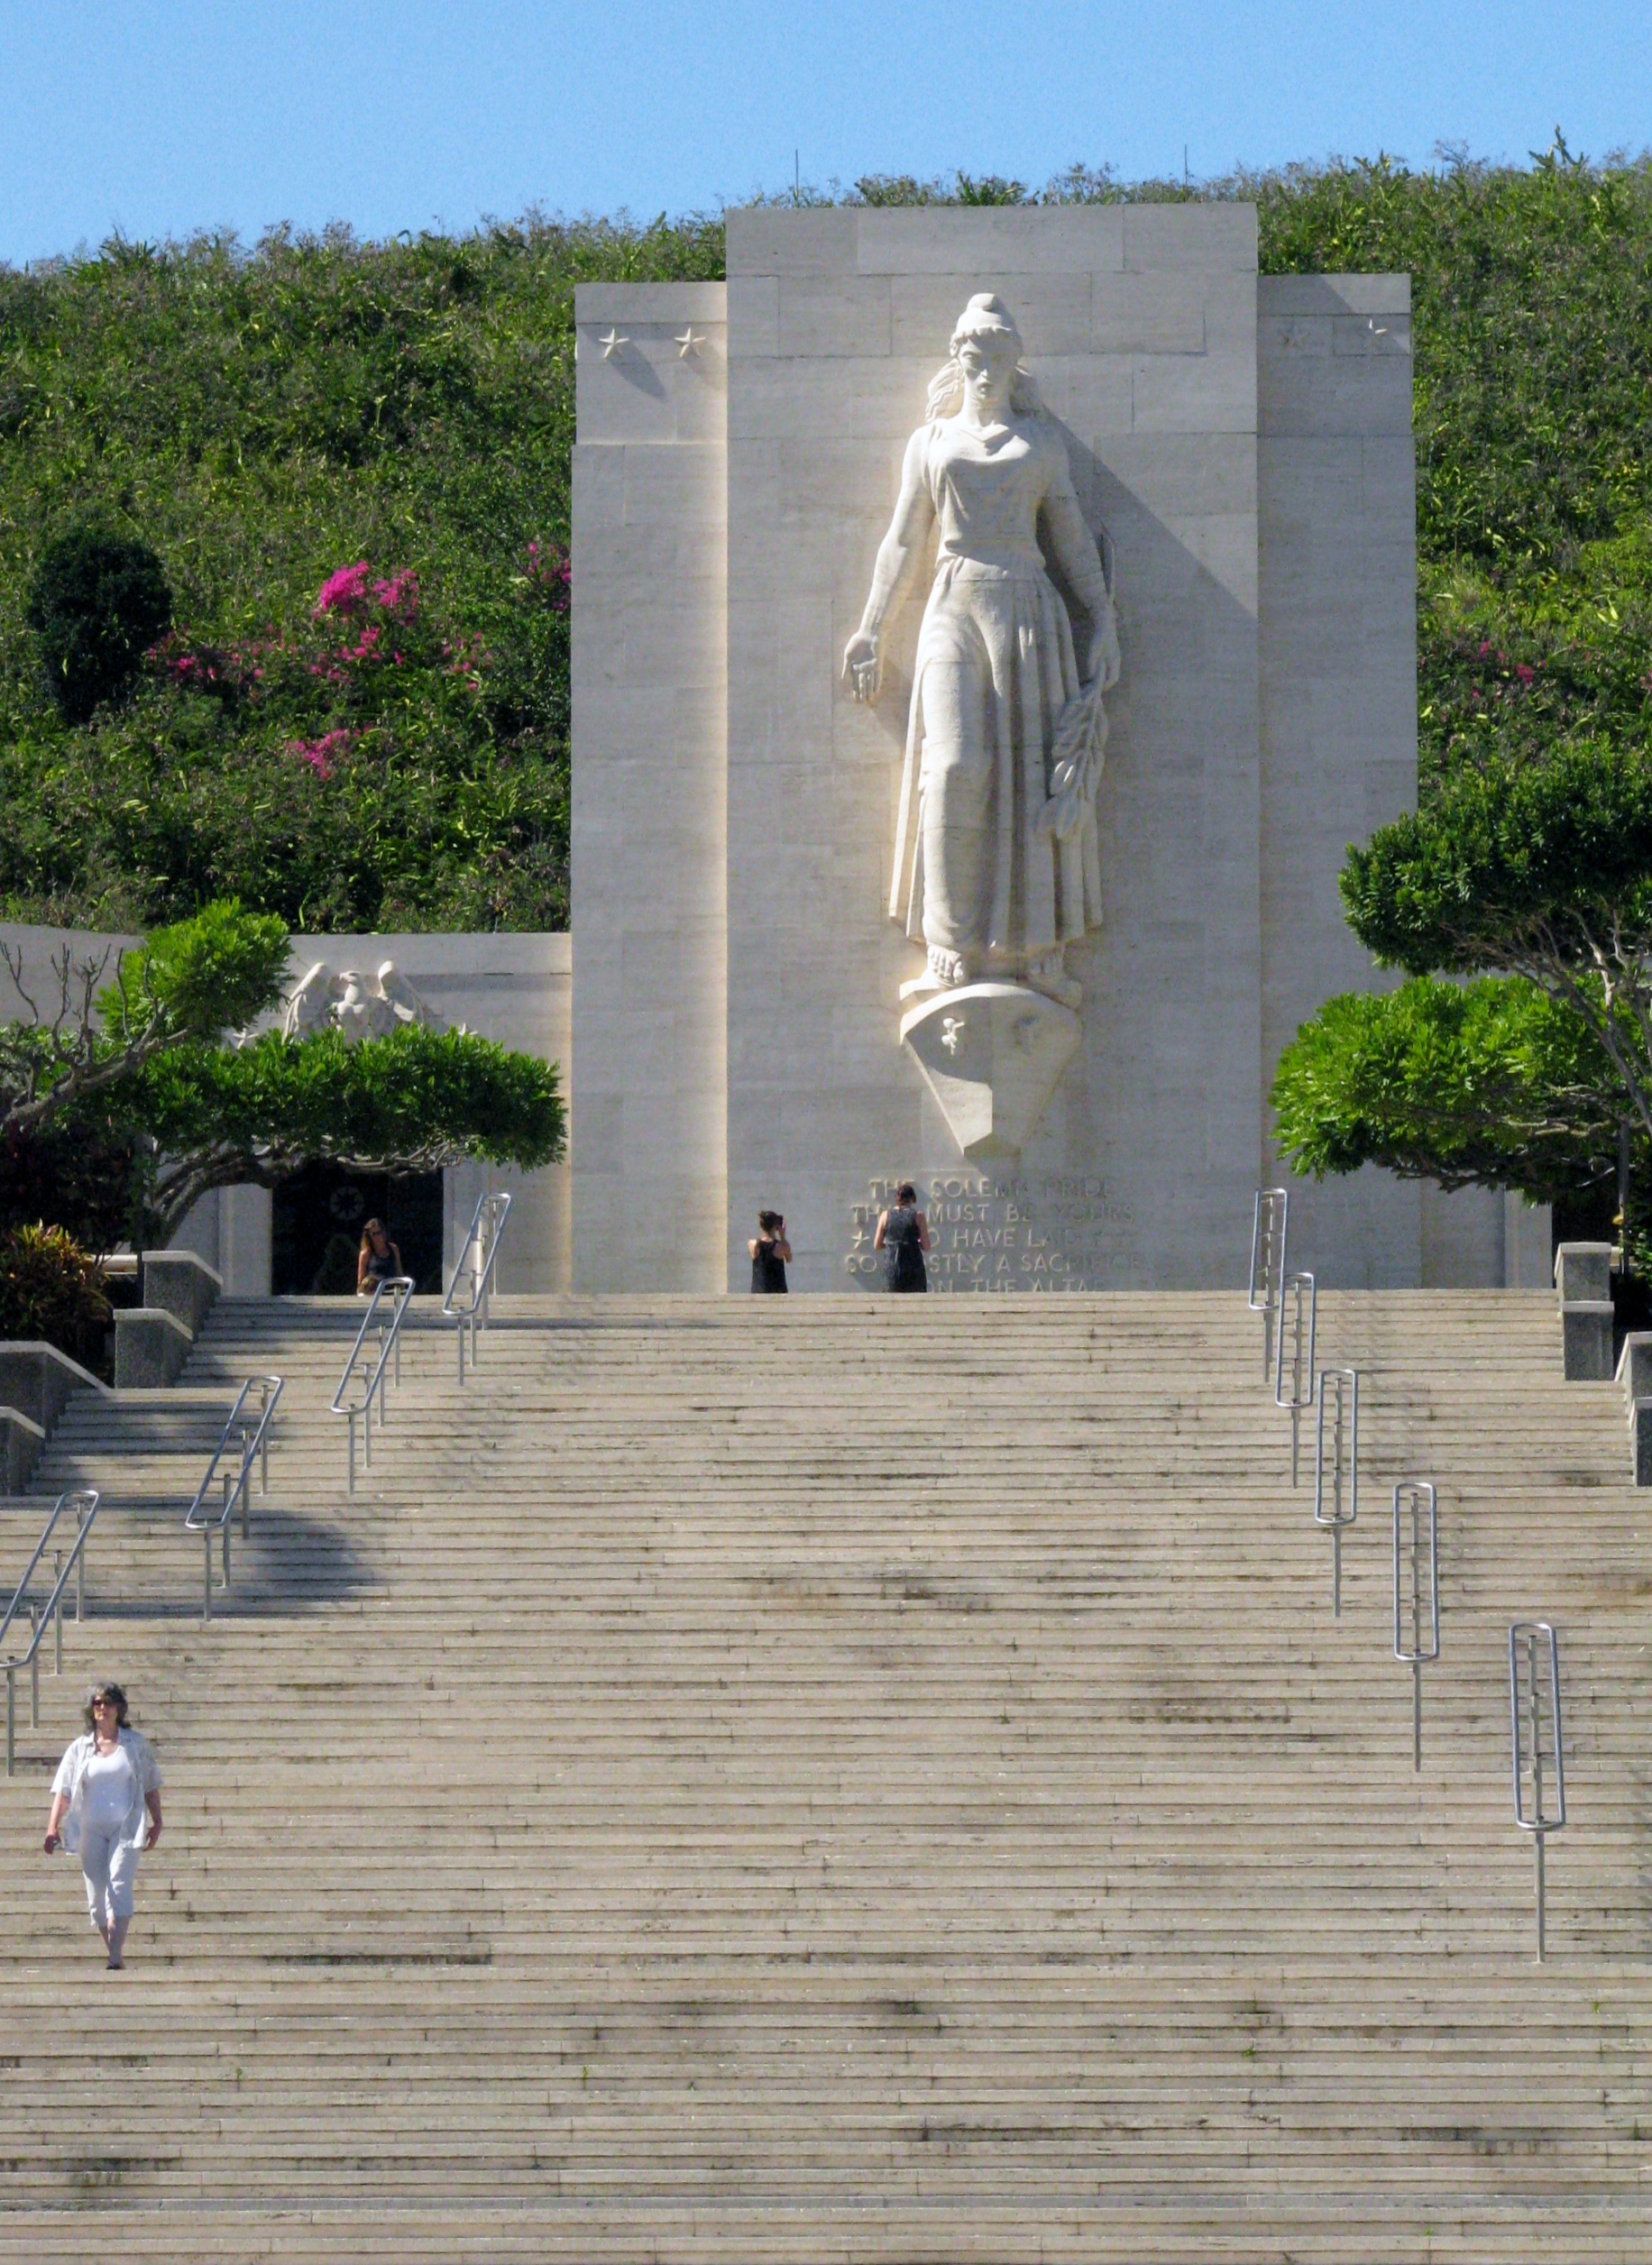 The statue is featured in the opening sequence of the both the 1970s television series Hawaii Five-O and its 2010 remake has also filmed at the cemetery several times—the father of lead character, Steve McGarrett, is supposed to be buried near the statue.